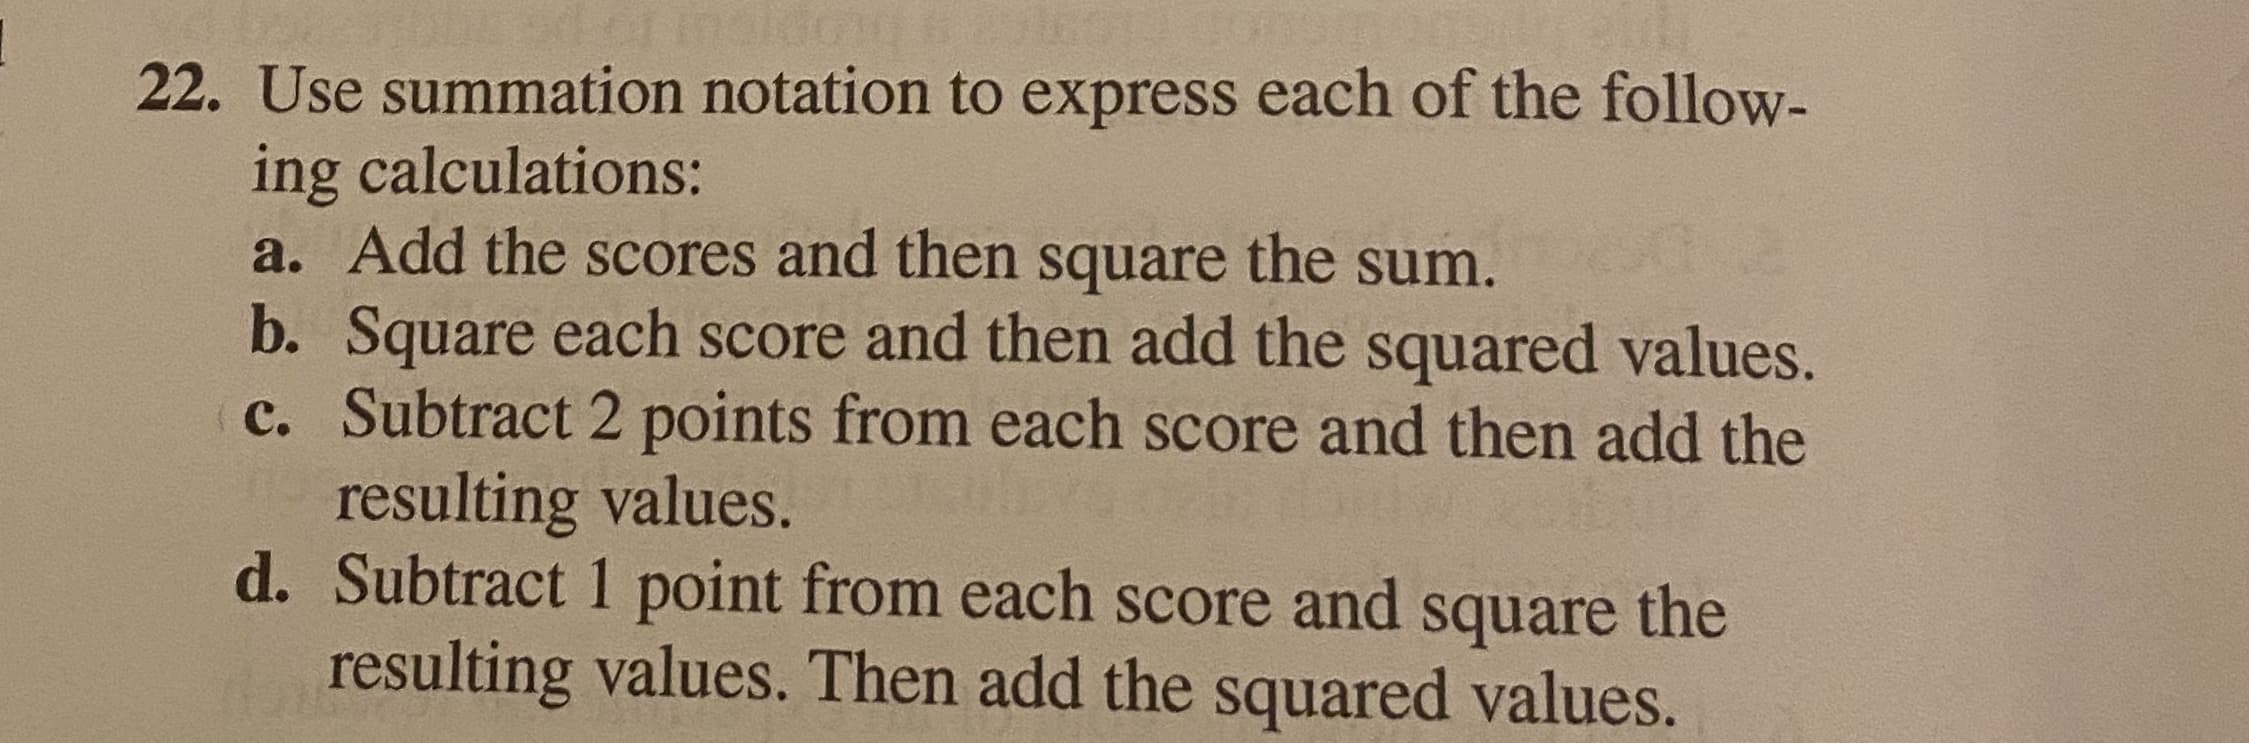 Use summation notation to express each of the follow-
ing calculations:
a. Add the scores and then square the sum.
b. Square each score and then add the squared values.
c. Subtract 2 points from each score and then add the
resulting values.
d. Subtract 1 point from each score and square the
resulting values. Then add the squared yalues
